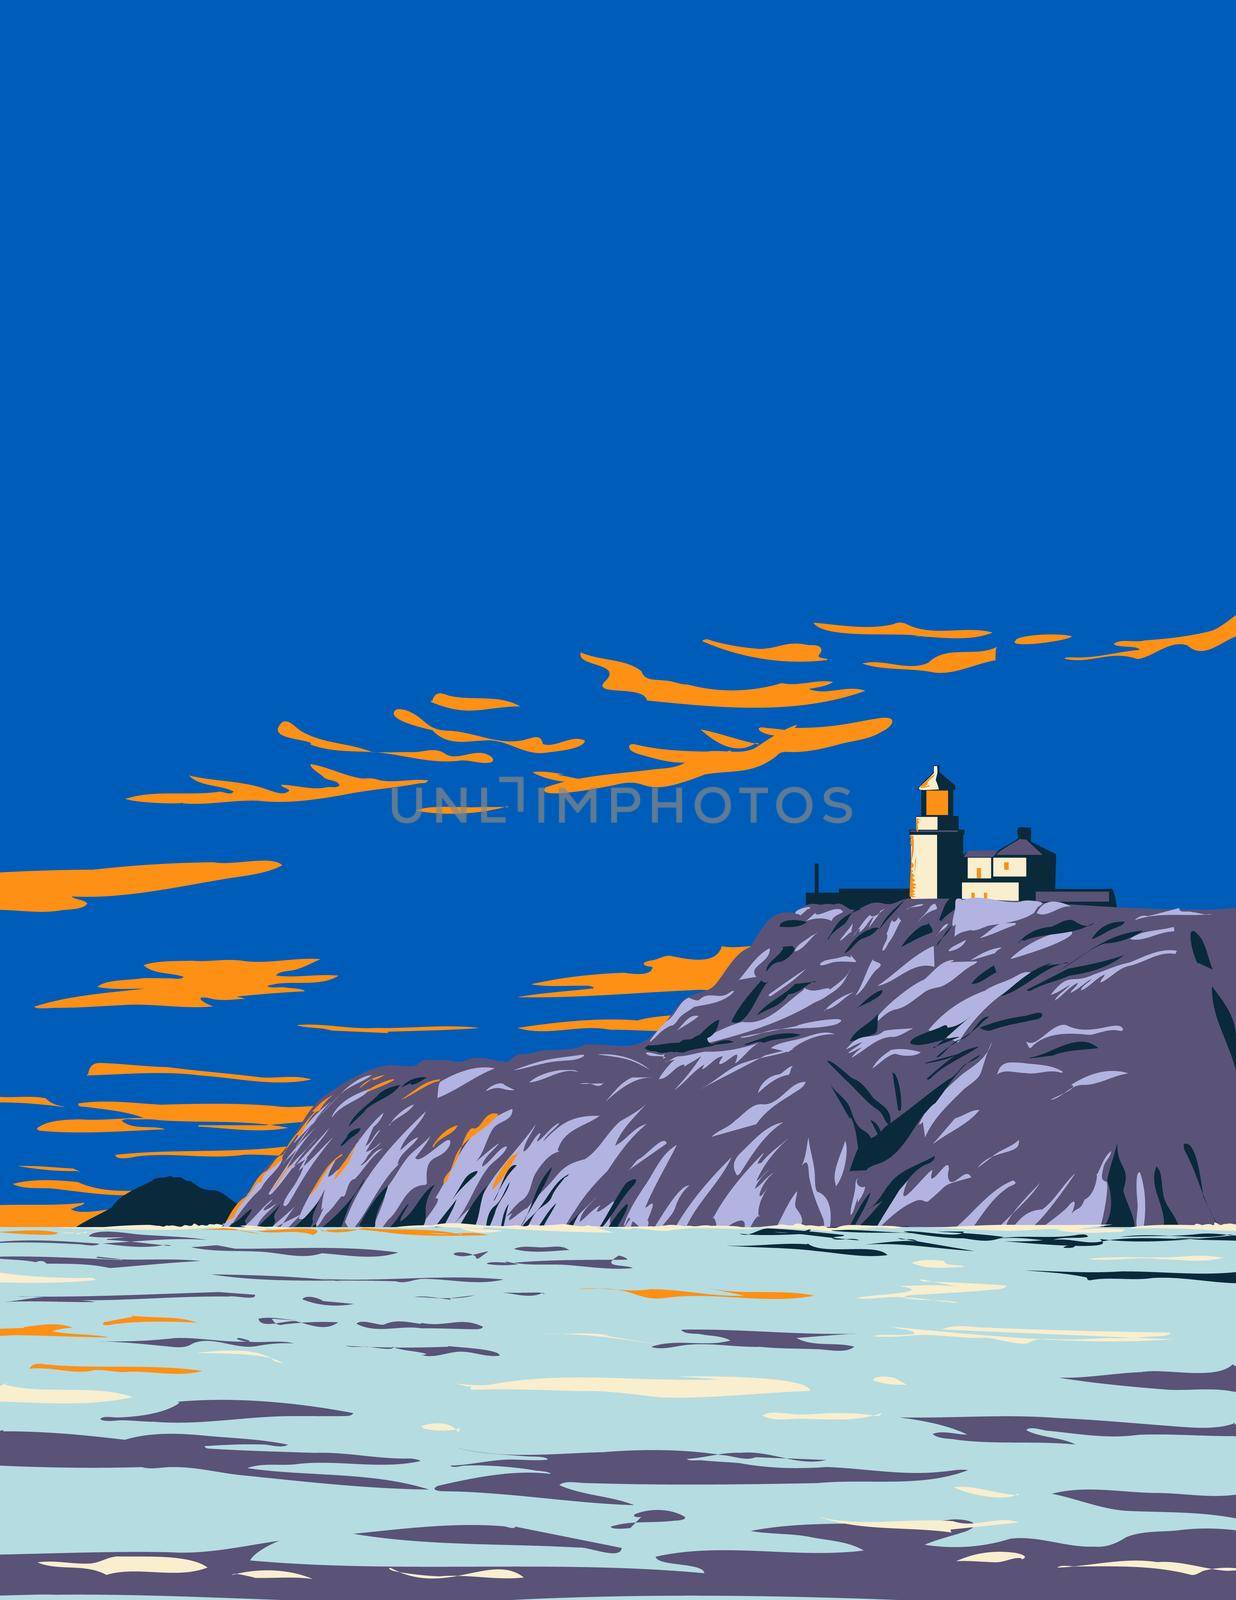 Art Deco or WPA poster of South Bishops Lighthouse on Ramsey Island in Pembrokeshire Coast National Park in Wales United Kingdom done in works project administration style.